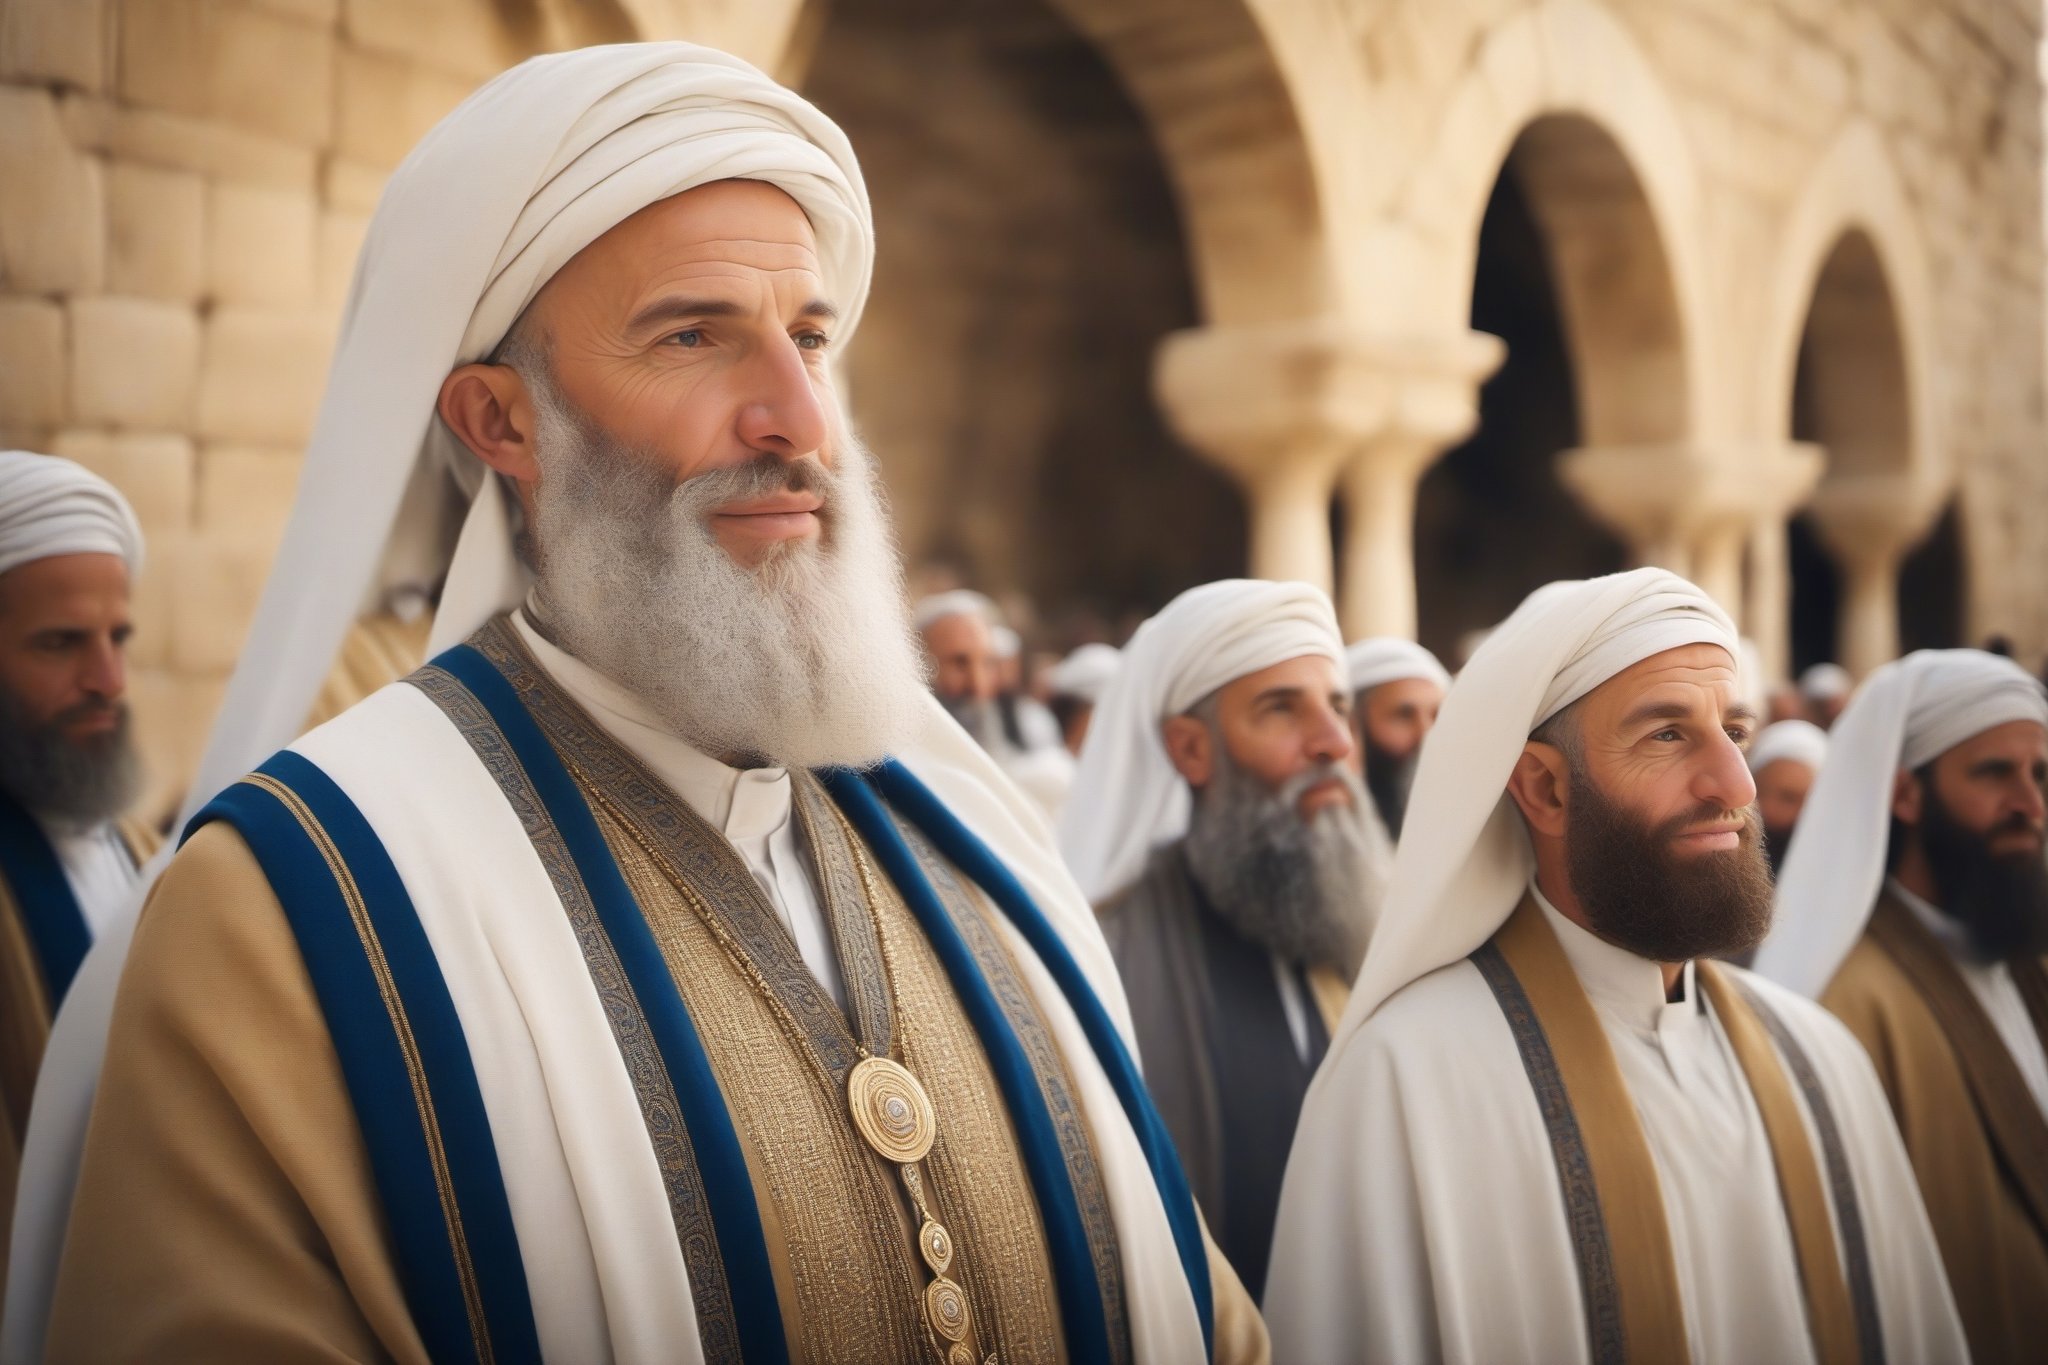 Jerusalem City DC 50 years, Jewish clothing of the time, outside in the temple of Jerusalem preaching, perfect faces, perfect eyes, masterpiece, better quality, impressive and extremely detailed unified CG